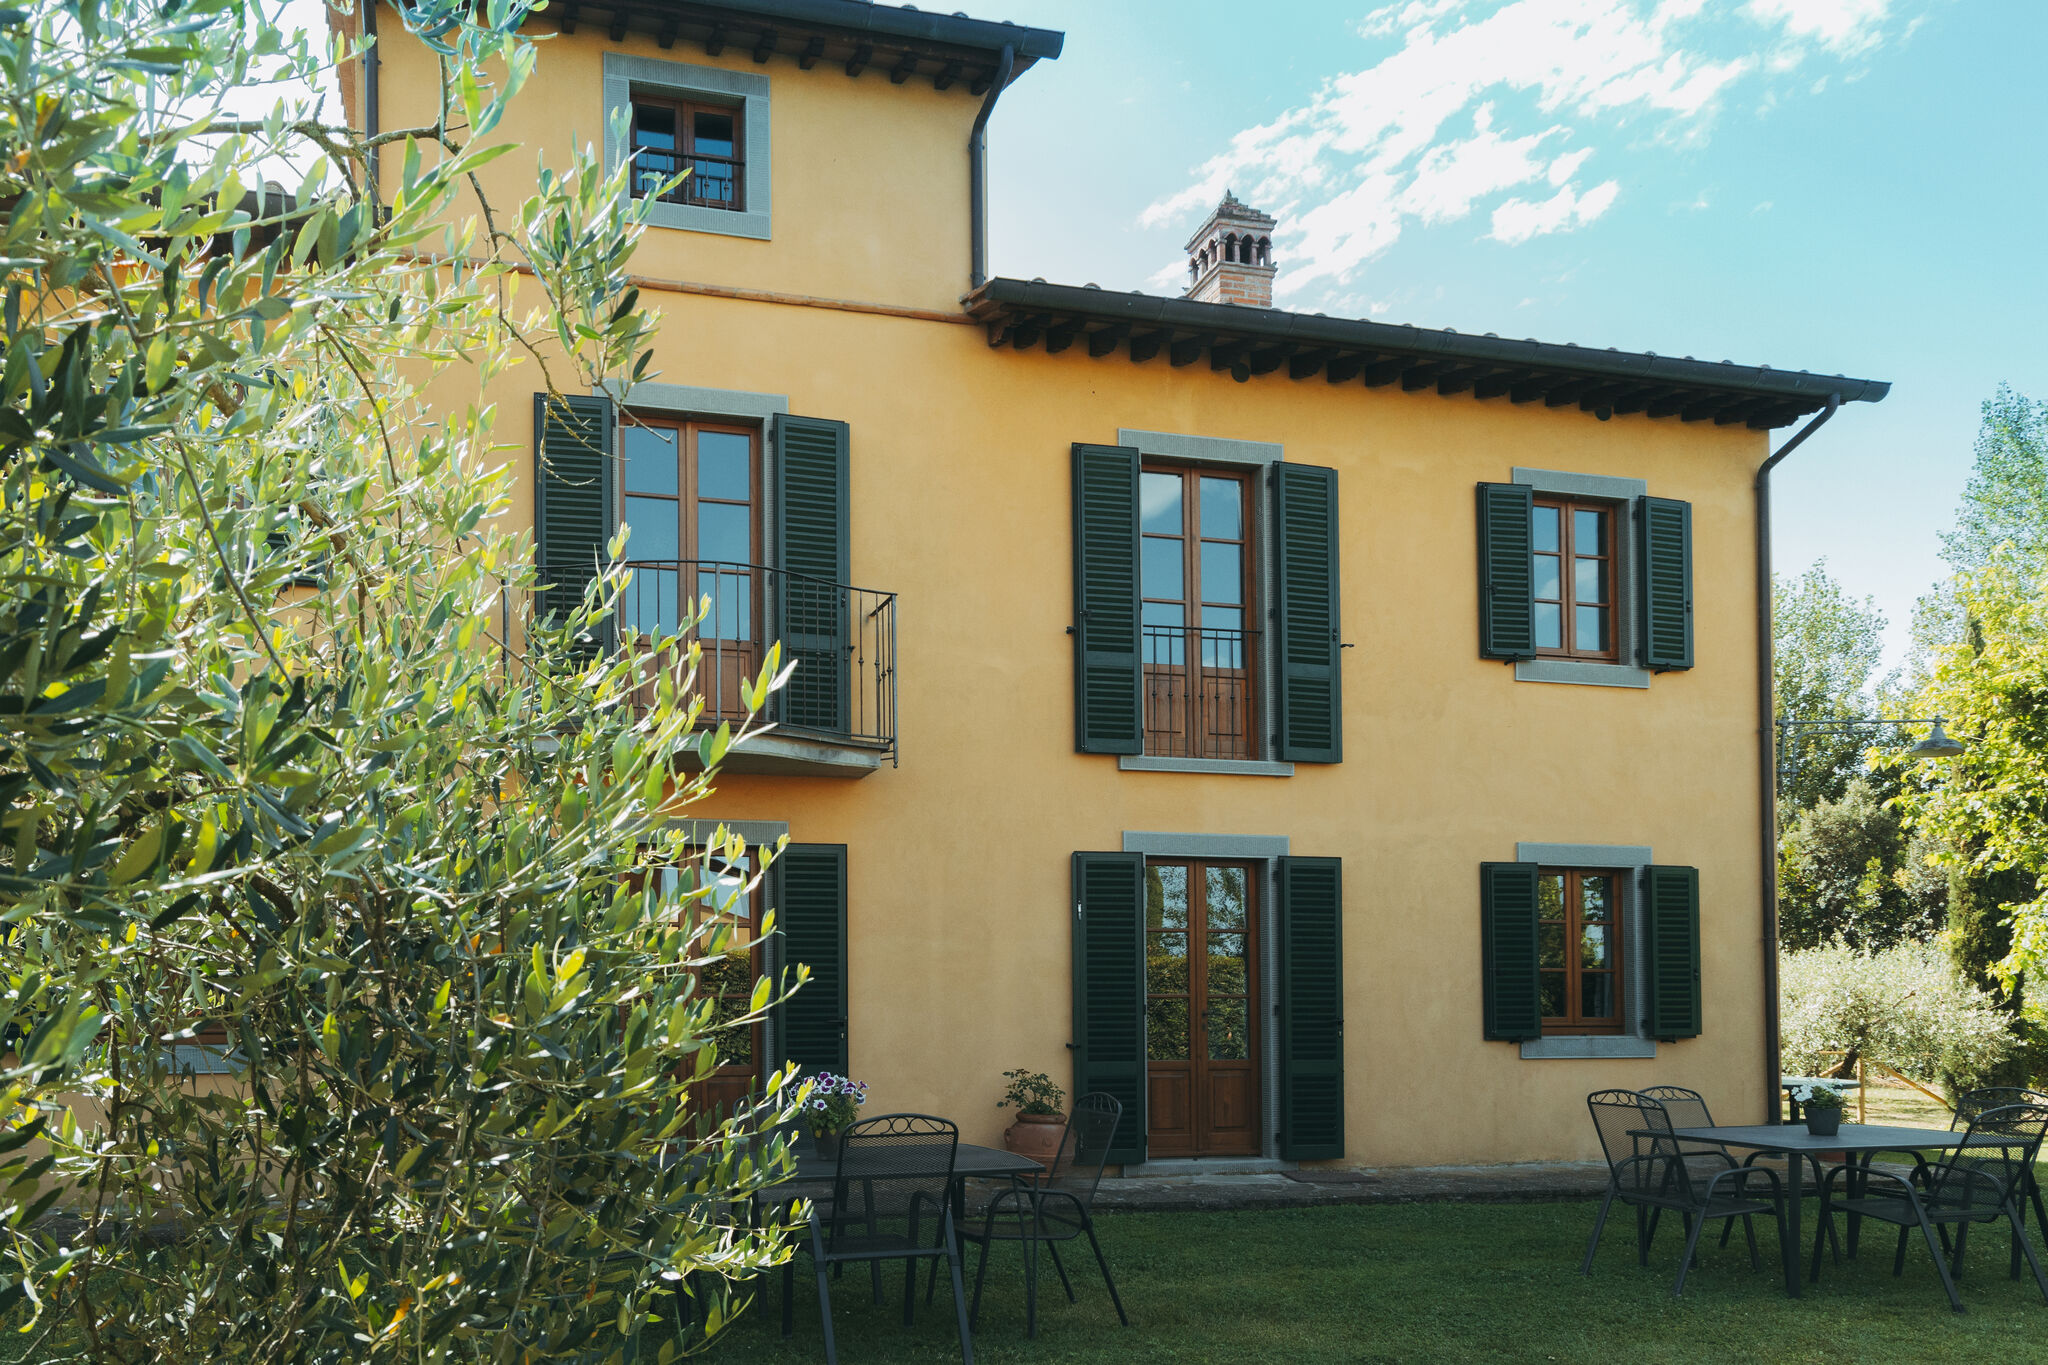 Farmhouse with private terrace, garden and pool, overlooking the town of Cortona